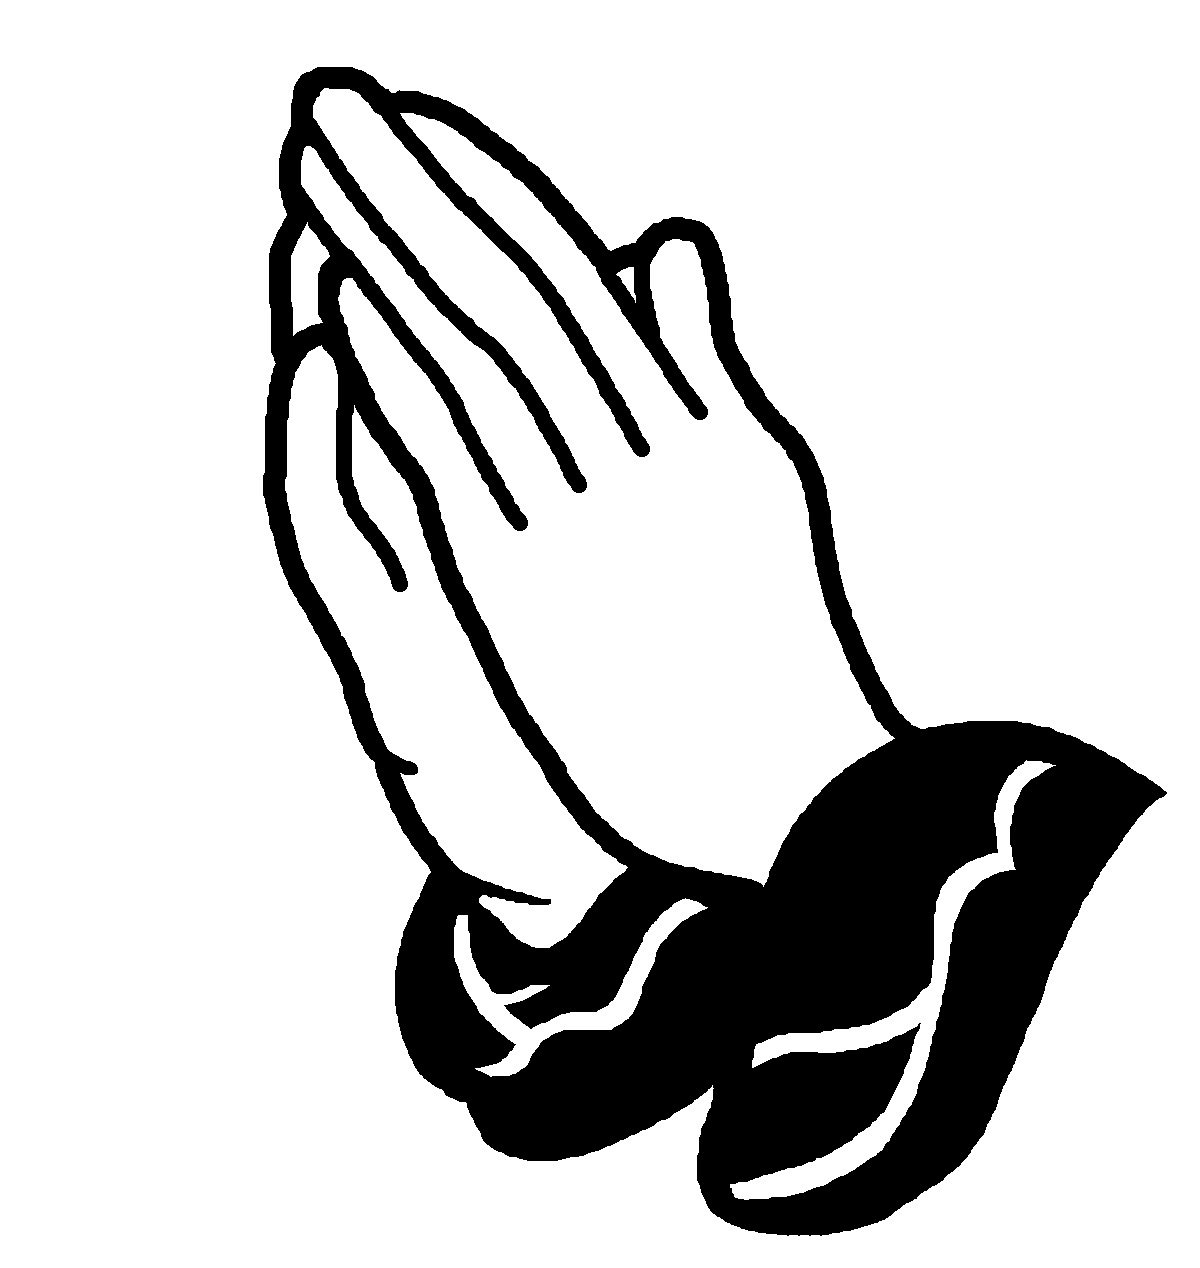 Free Picture Of Praying Hands Download Free Picture Of Praying Hands Png Images Free ClipArts